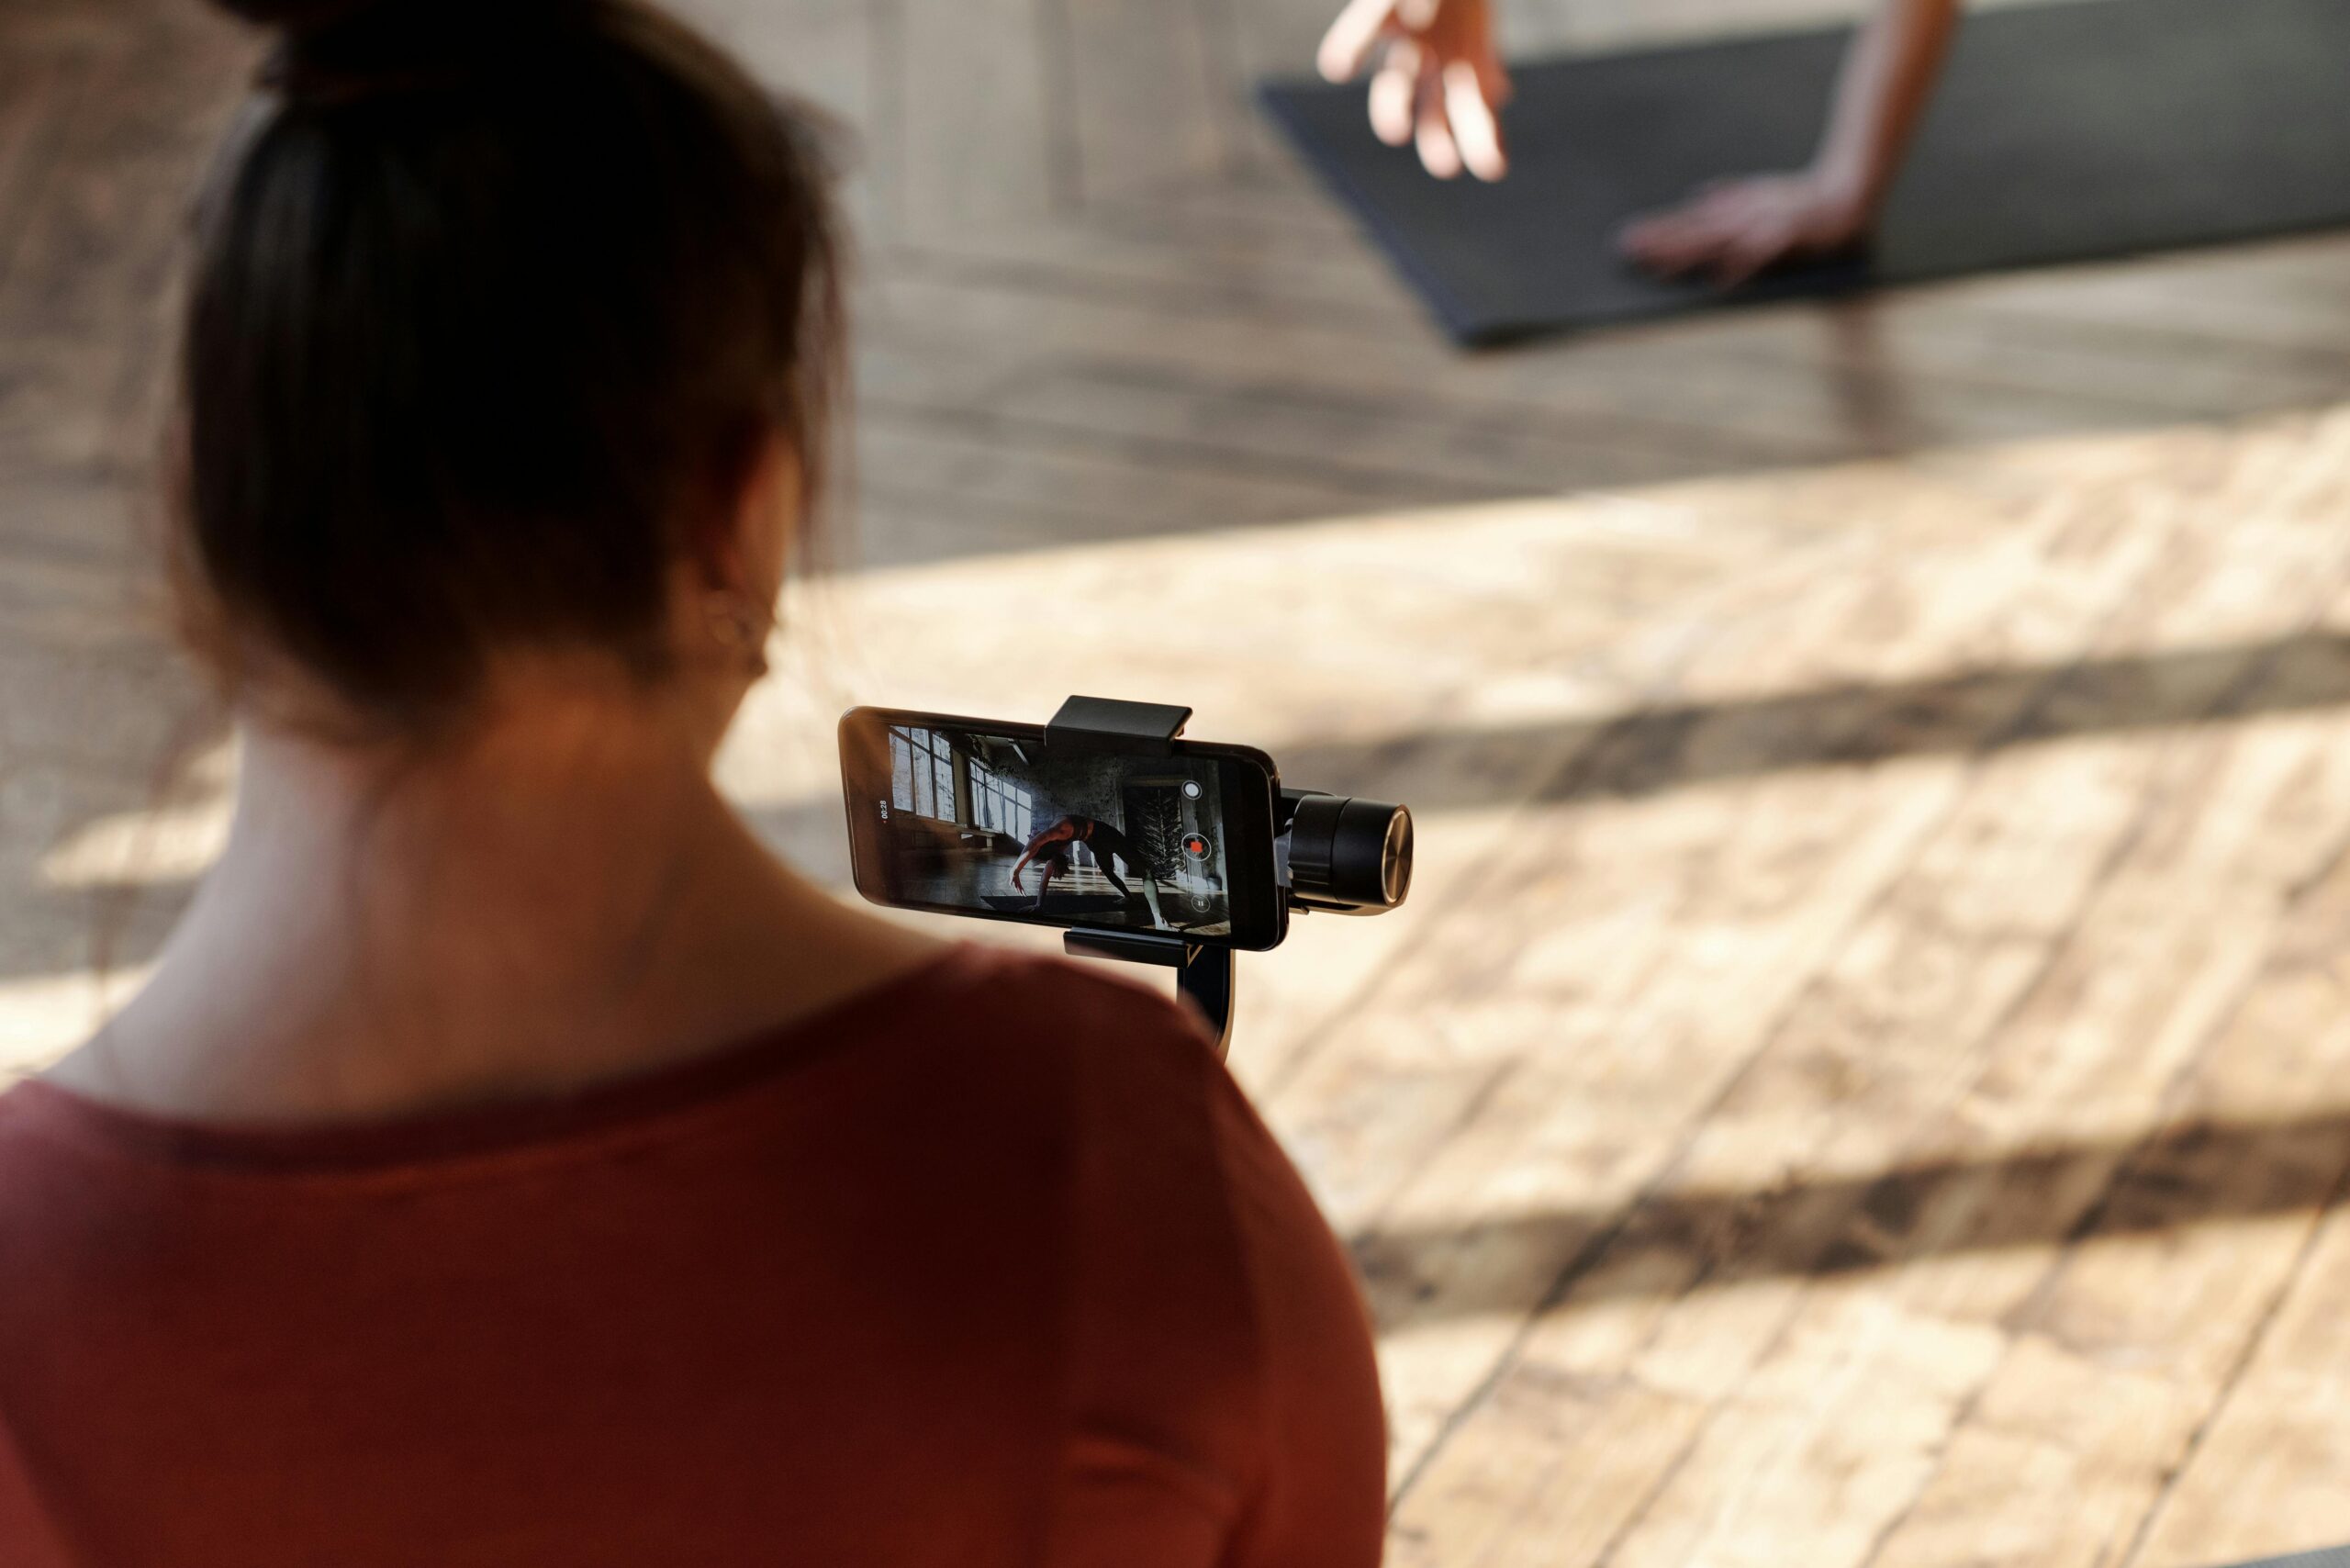 Gyms crack down on people filming themselves exercising amid